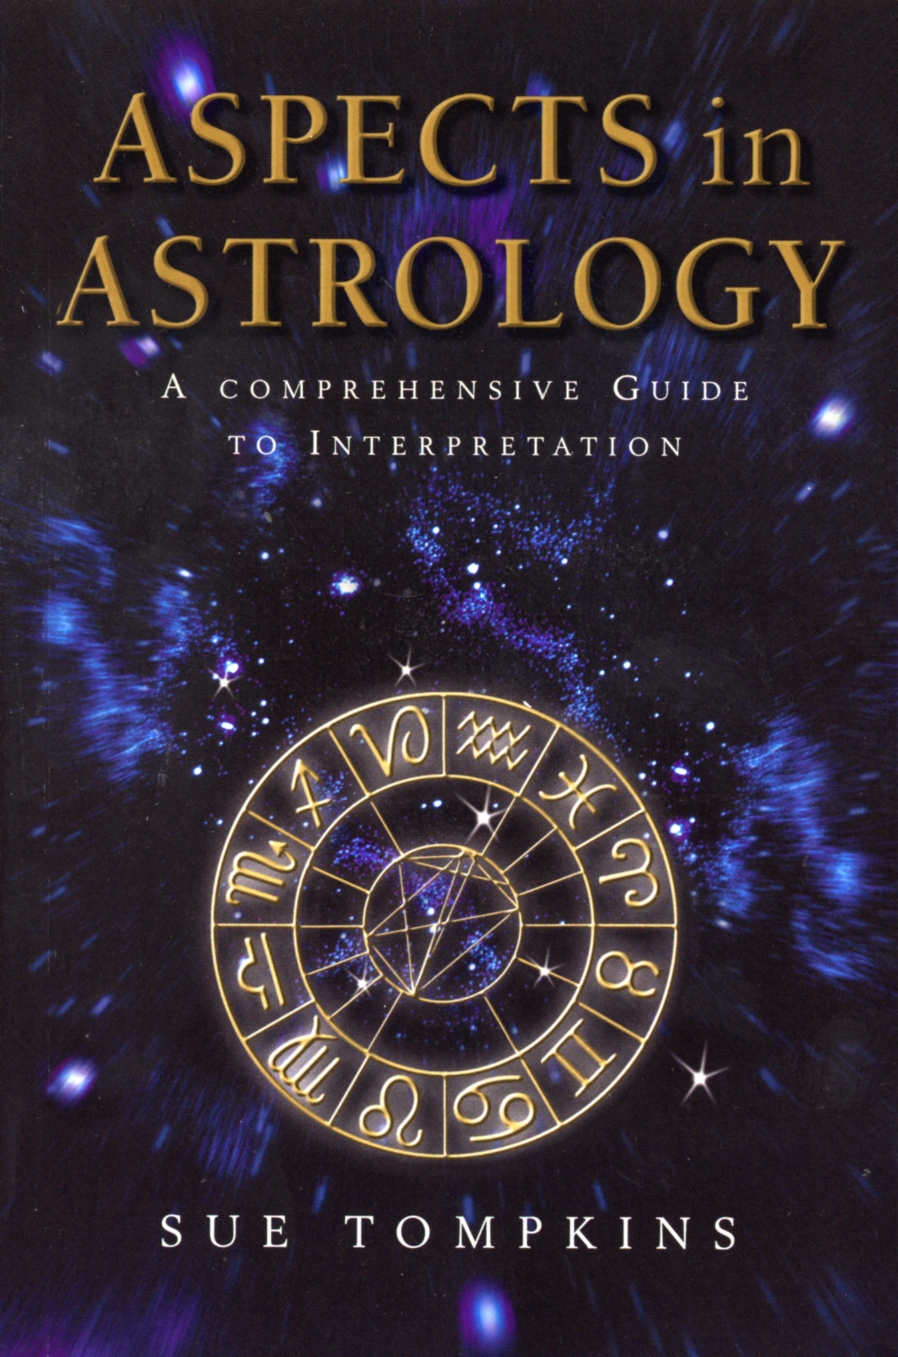 books on astrology that changed the world